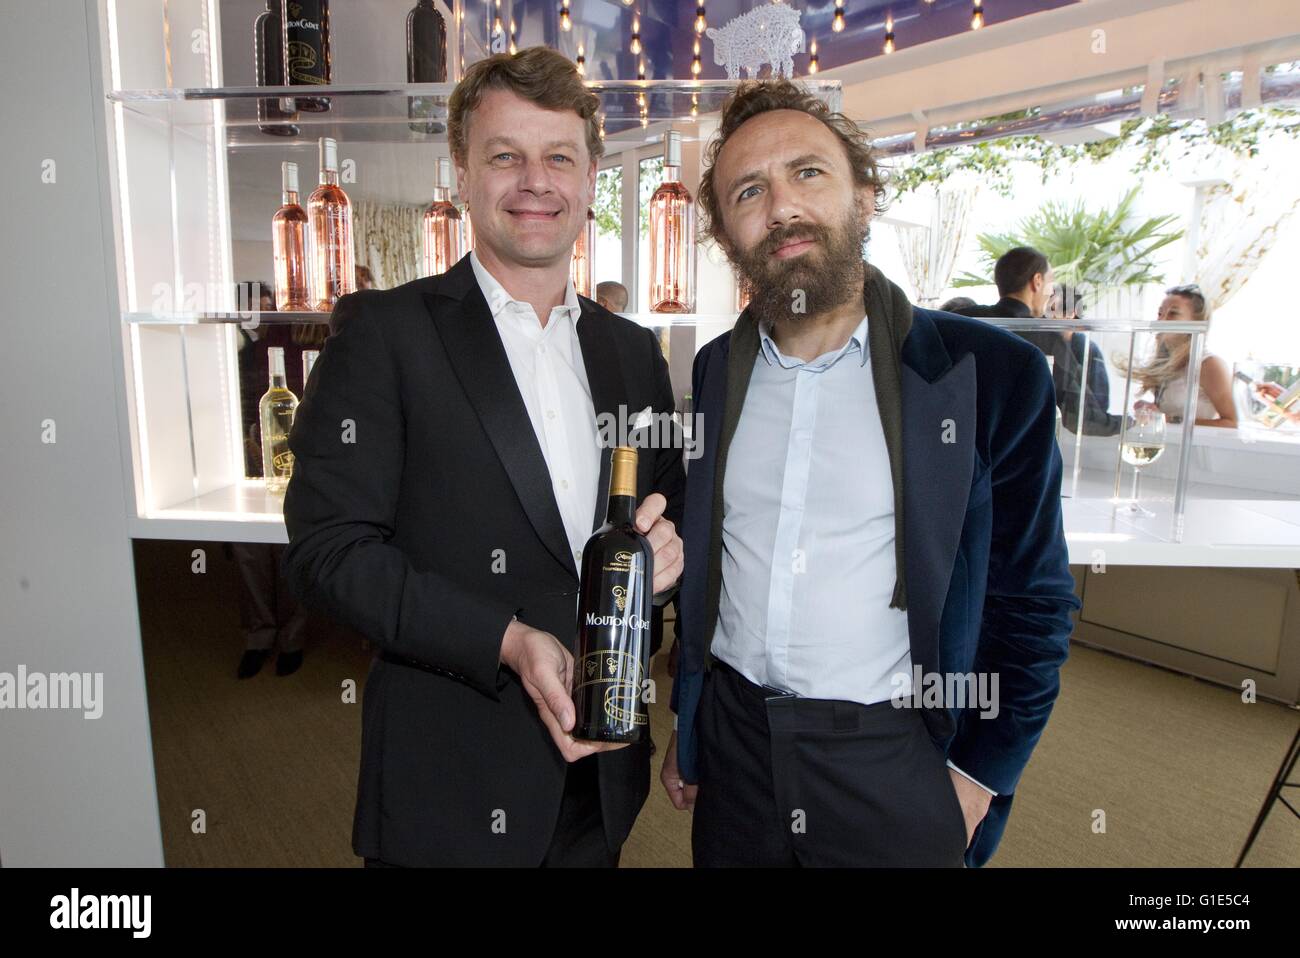 Cannes, France - May 12, 2016: Hugues Lechanoine, CEO of Baron Philippe de Rothschild, S.A. and Artist Mathias Kiss at Mouton Cadet Wine Bar Opening | Verwendung weltweit Stock Photo